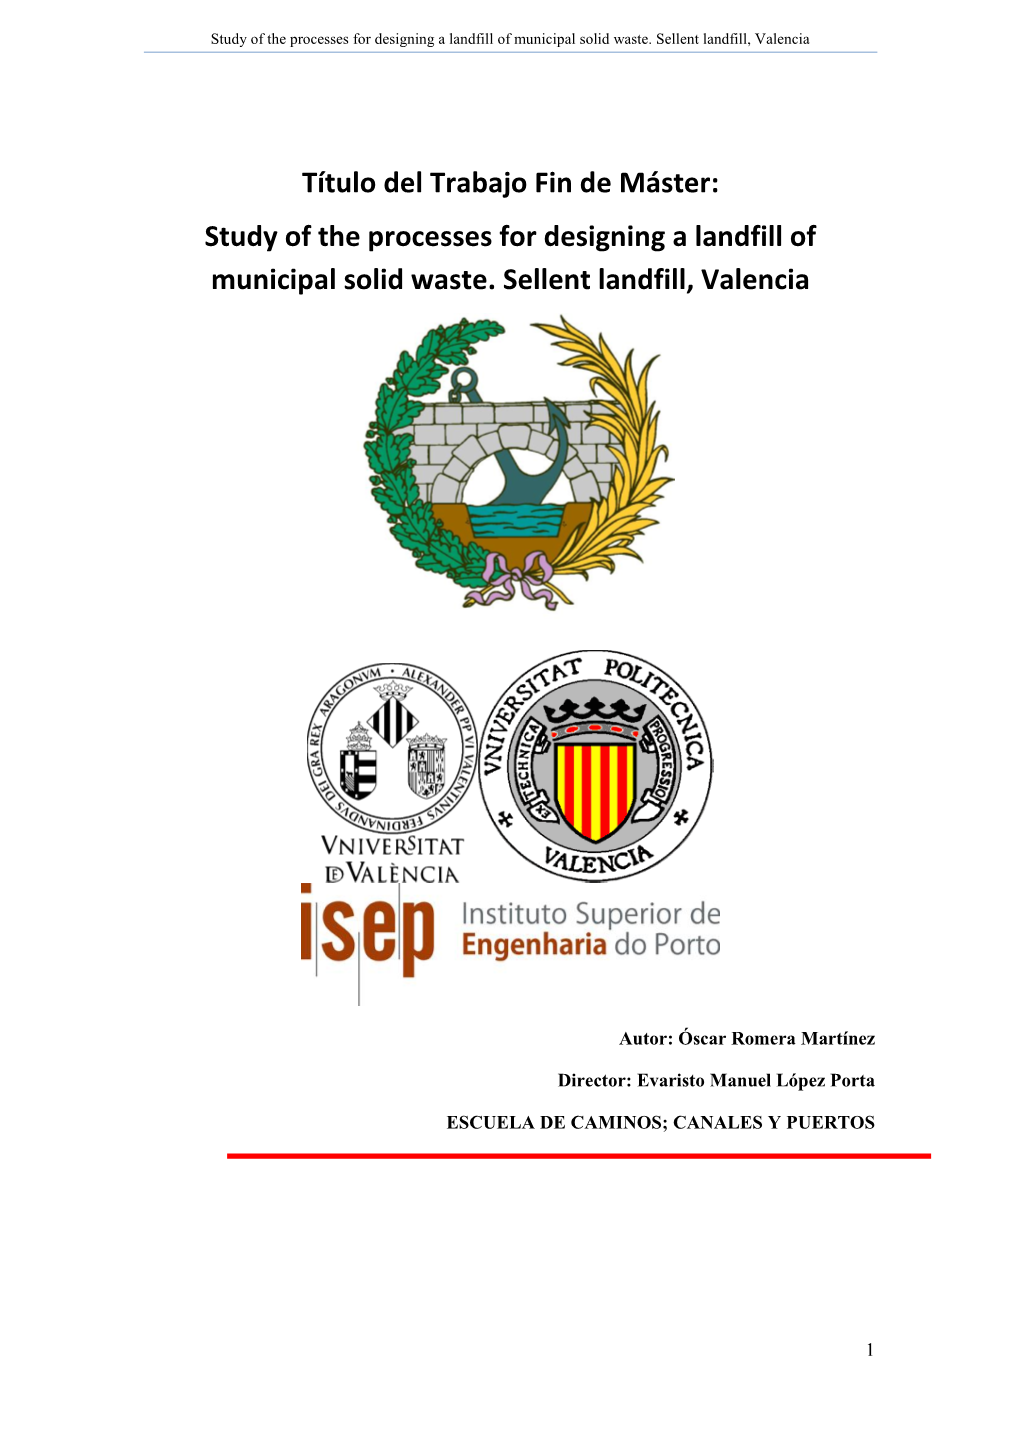 Título Del Trabajo Fin De Máster: Study of the Processes for Designing a Landfill of Municipal Solid Waste